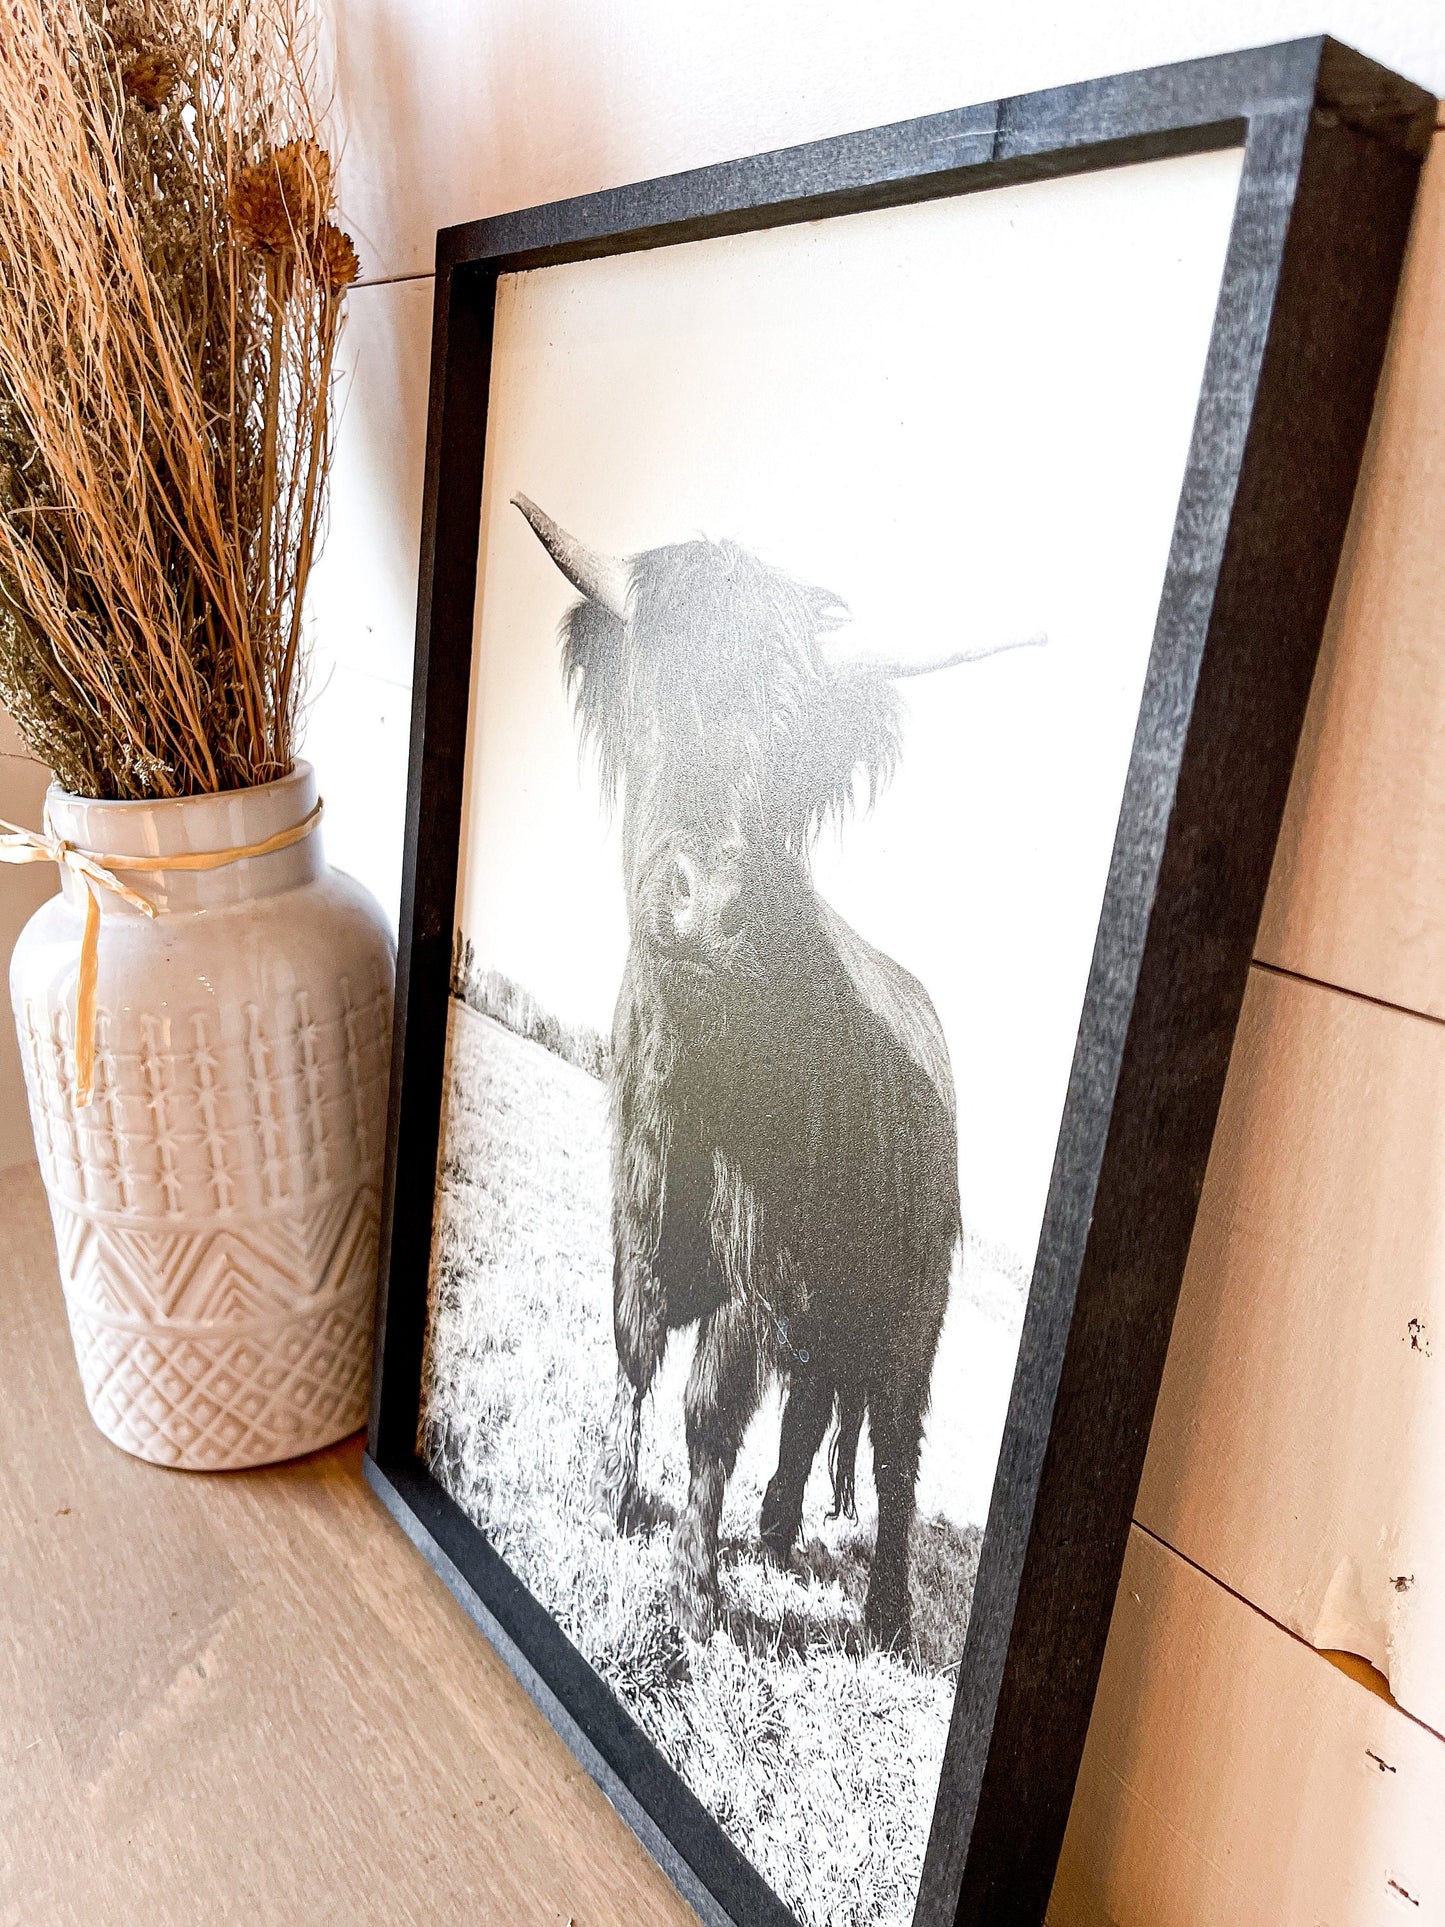 Maggie Black Scottish Highland Cow and baby Fluffy CowPhotos; Framed Wood Photo Signs